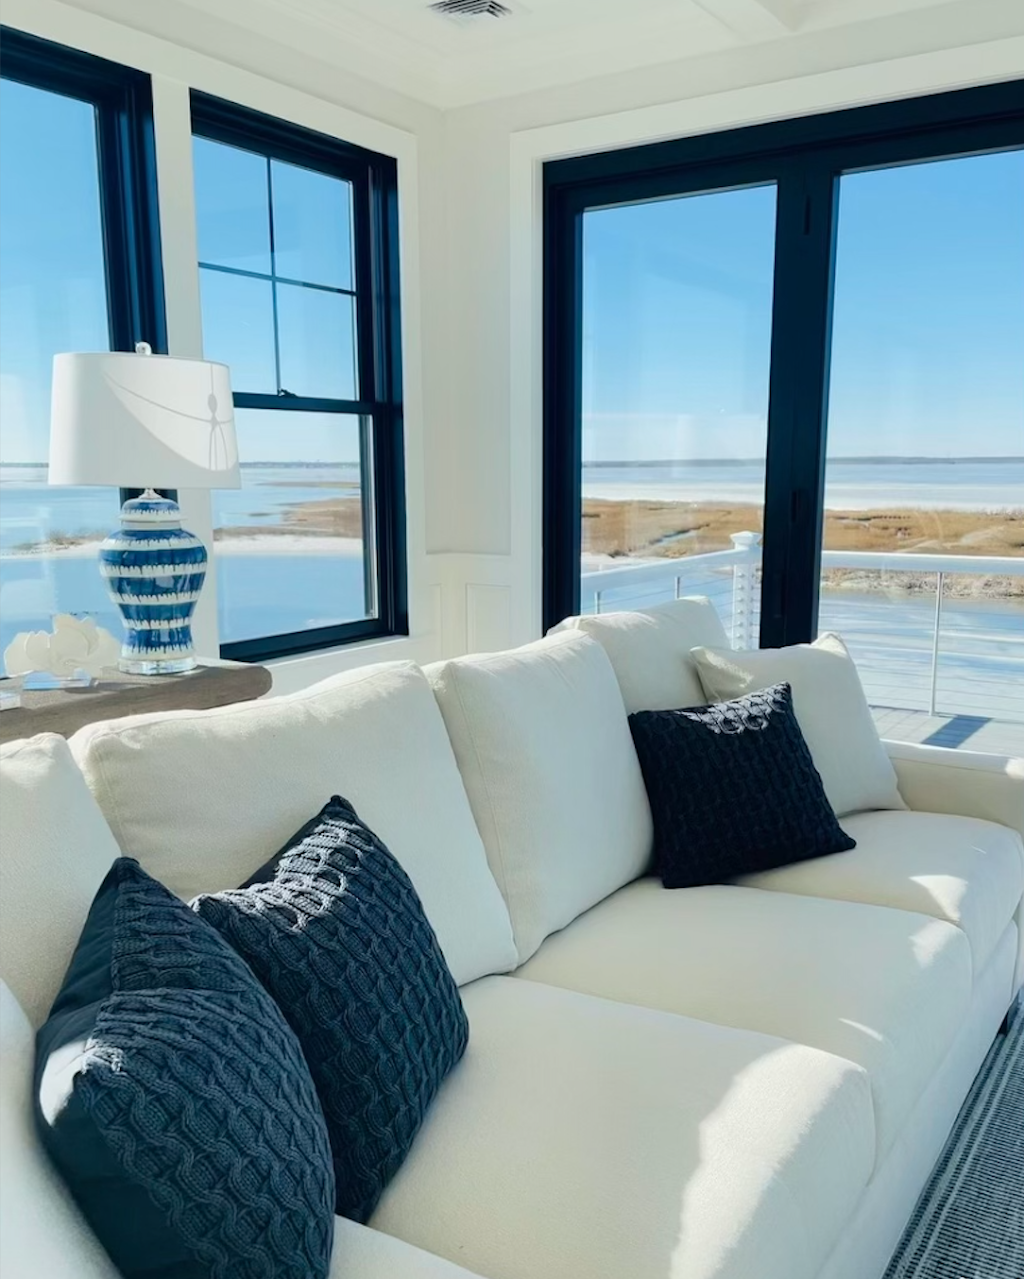 The Beach Home | 1904 Grand Central Ave, Lavallette, NJ 08735 | Phone: (732) 793-0232